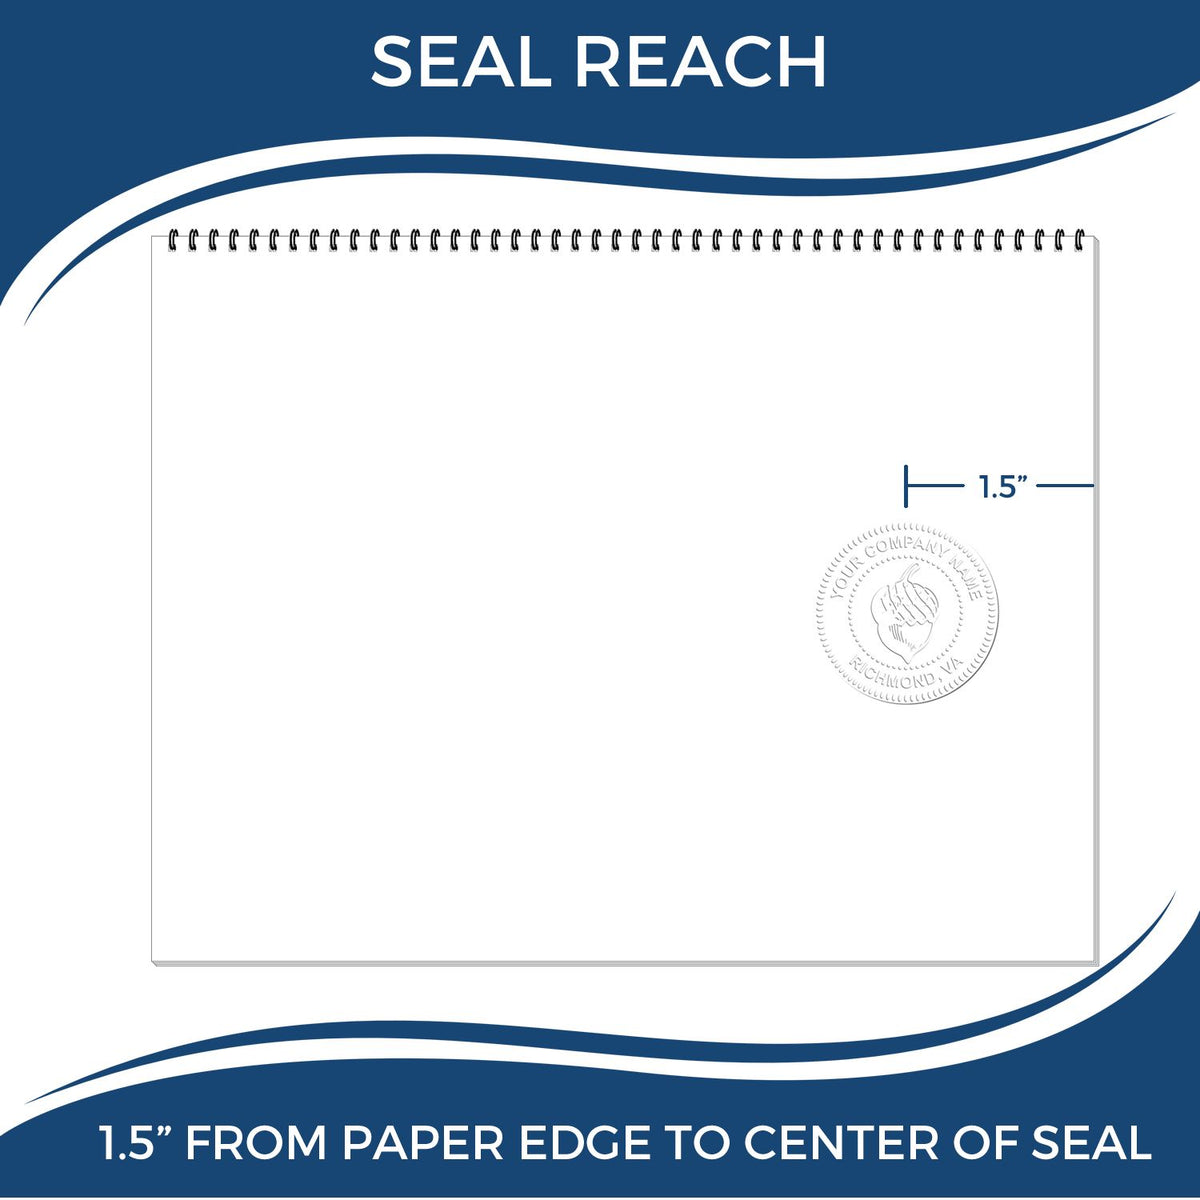 An infographic showing the seal reach which is represented by a ruler and a miniature seal image of the Hybrid Connecticut Geologist Seal